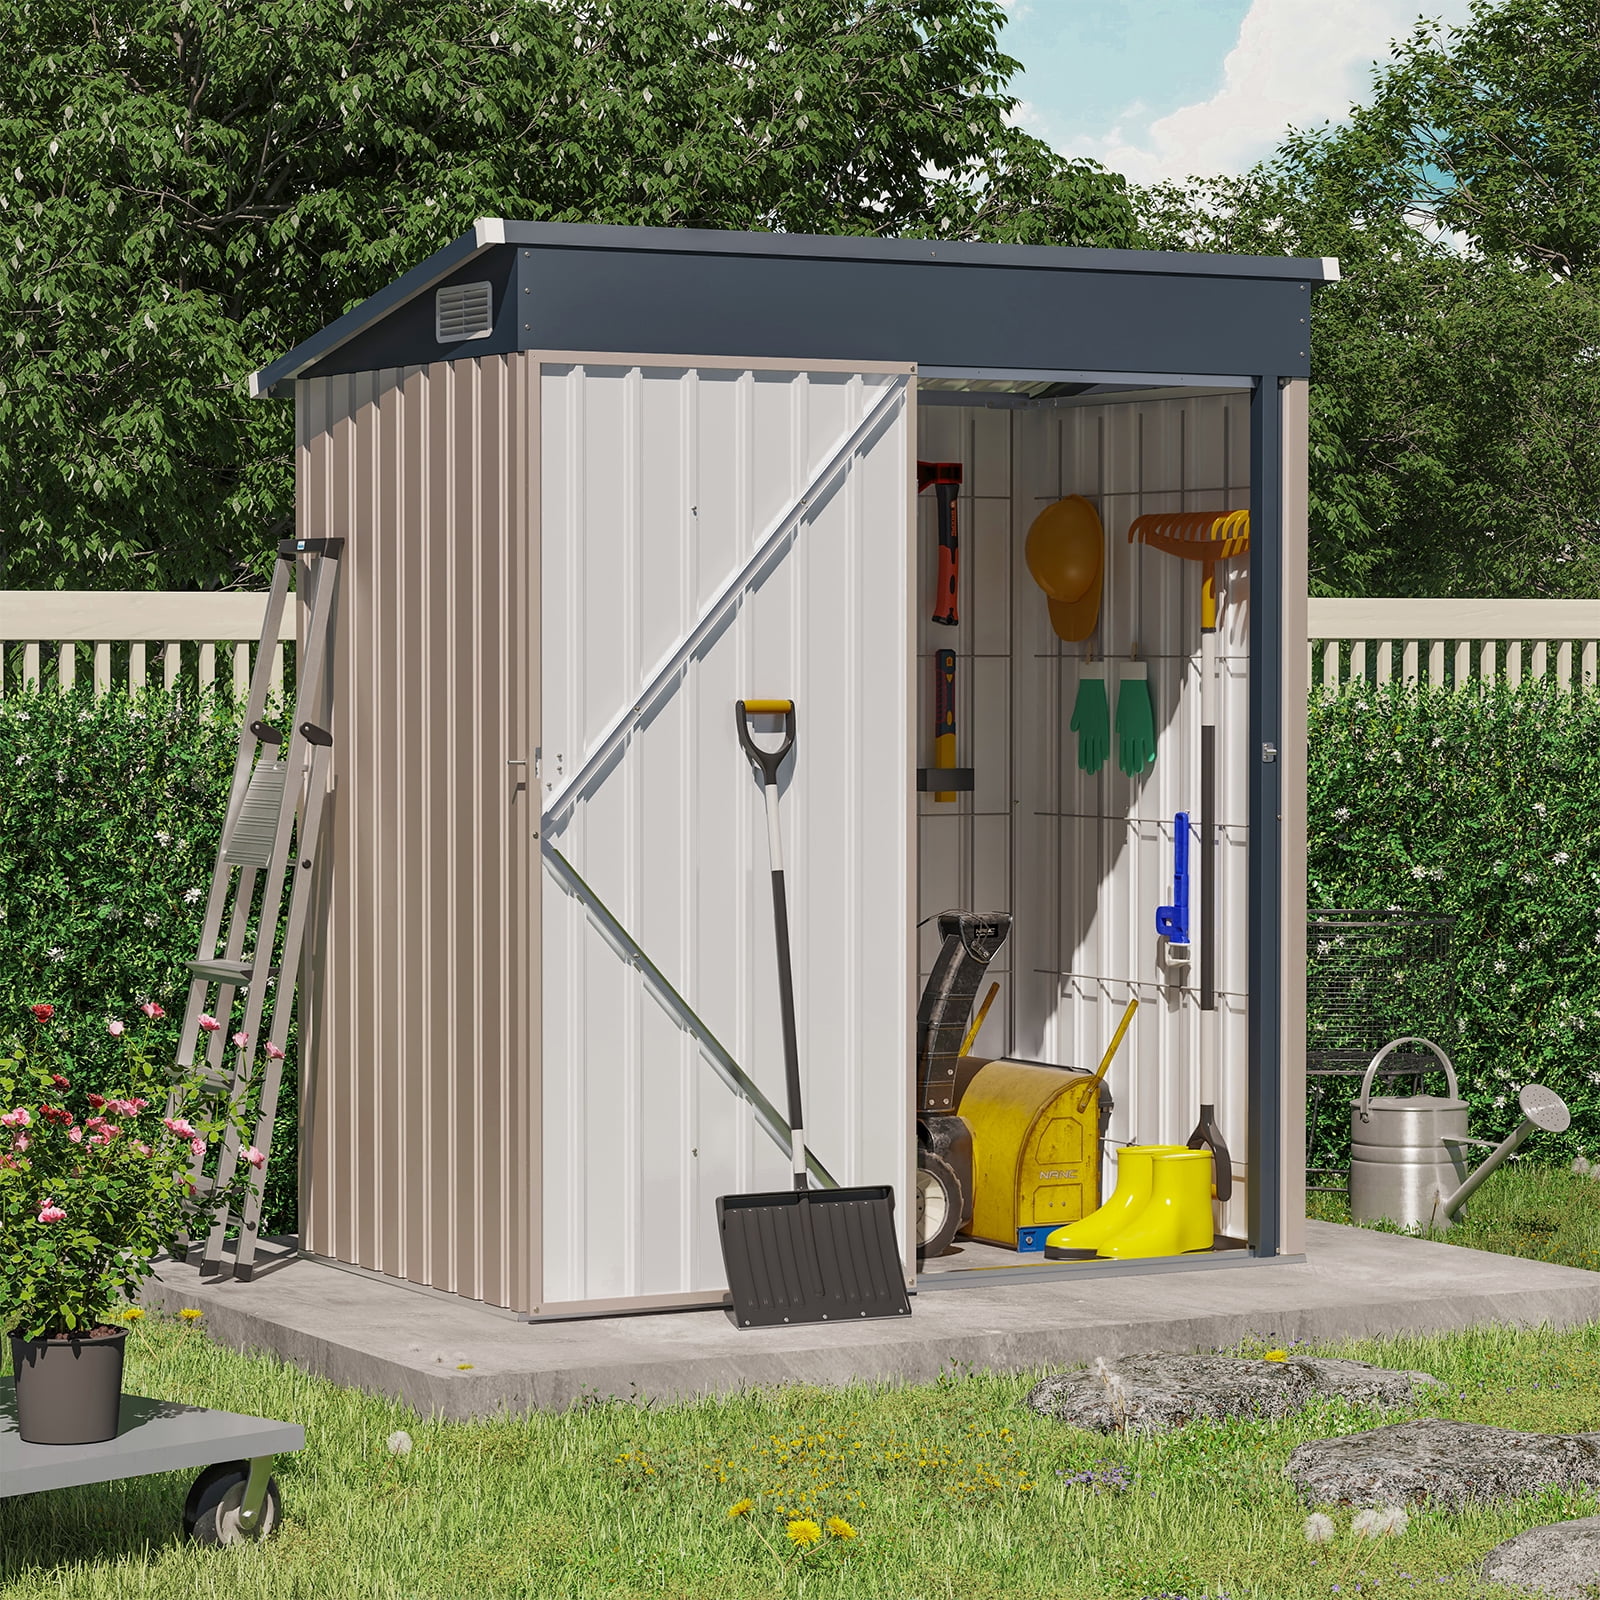 OC Orange-Casual 5' x 3' FT Outdoor Storage Shed, Metal Garden Tool Shed with Lockable Door, Outside Sheds & Storage Galvanized Steel, Brown - image 3 of 10